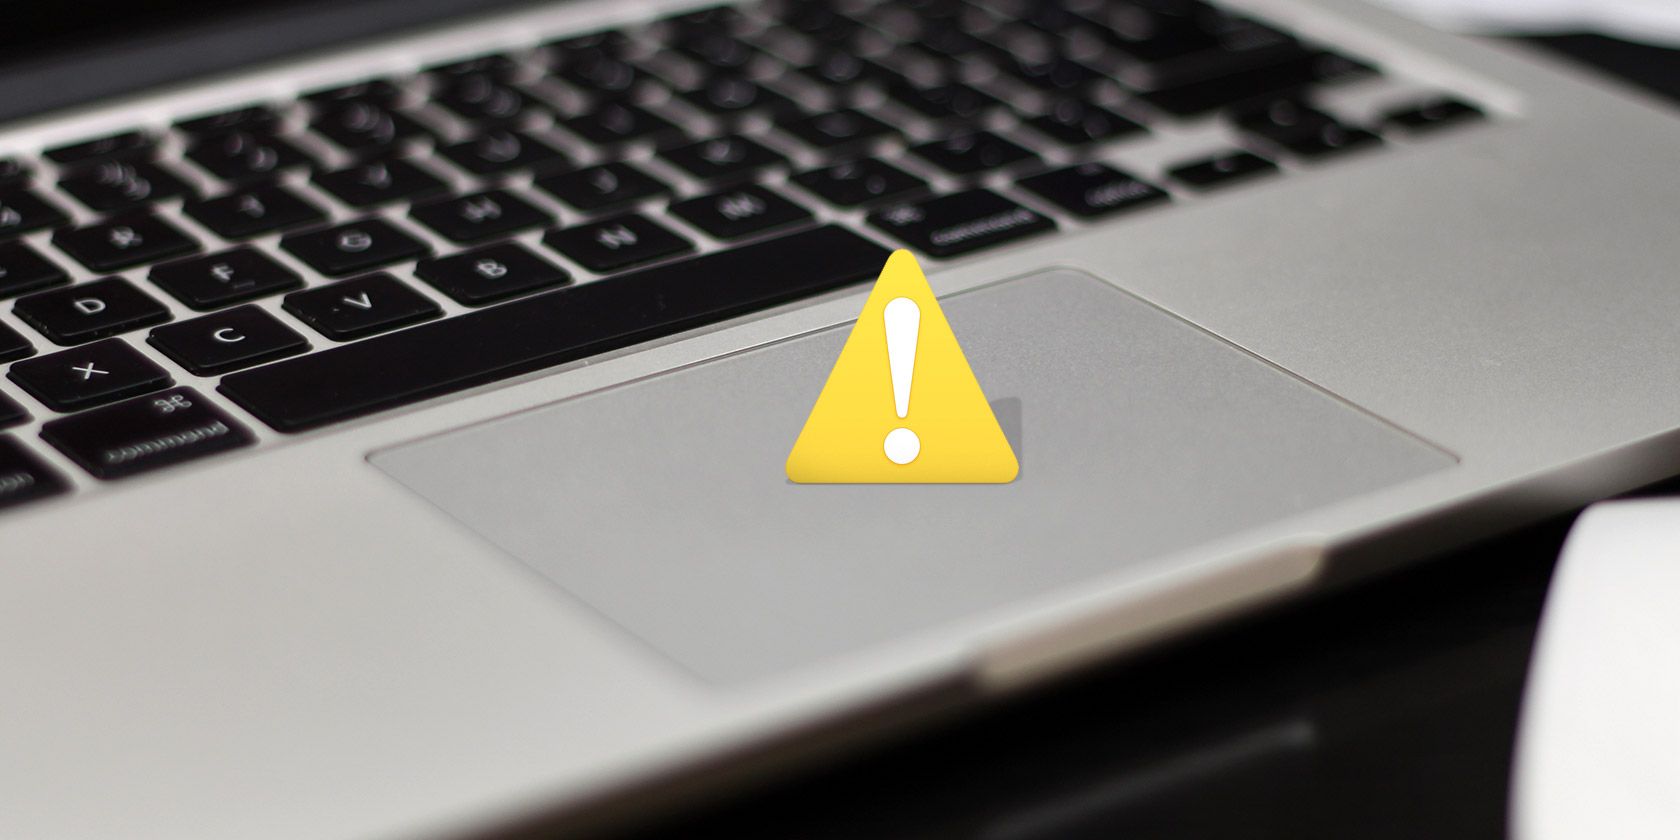 disease Absay Challenge MacBook Trackpad Not Working? 4 Troubleshooting Tips to Try